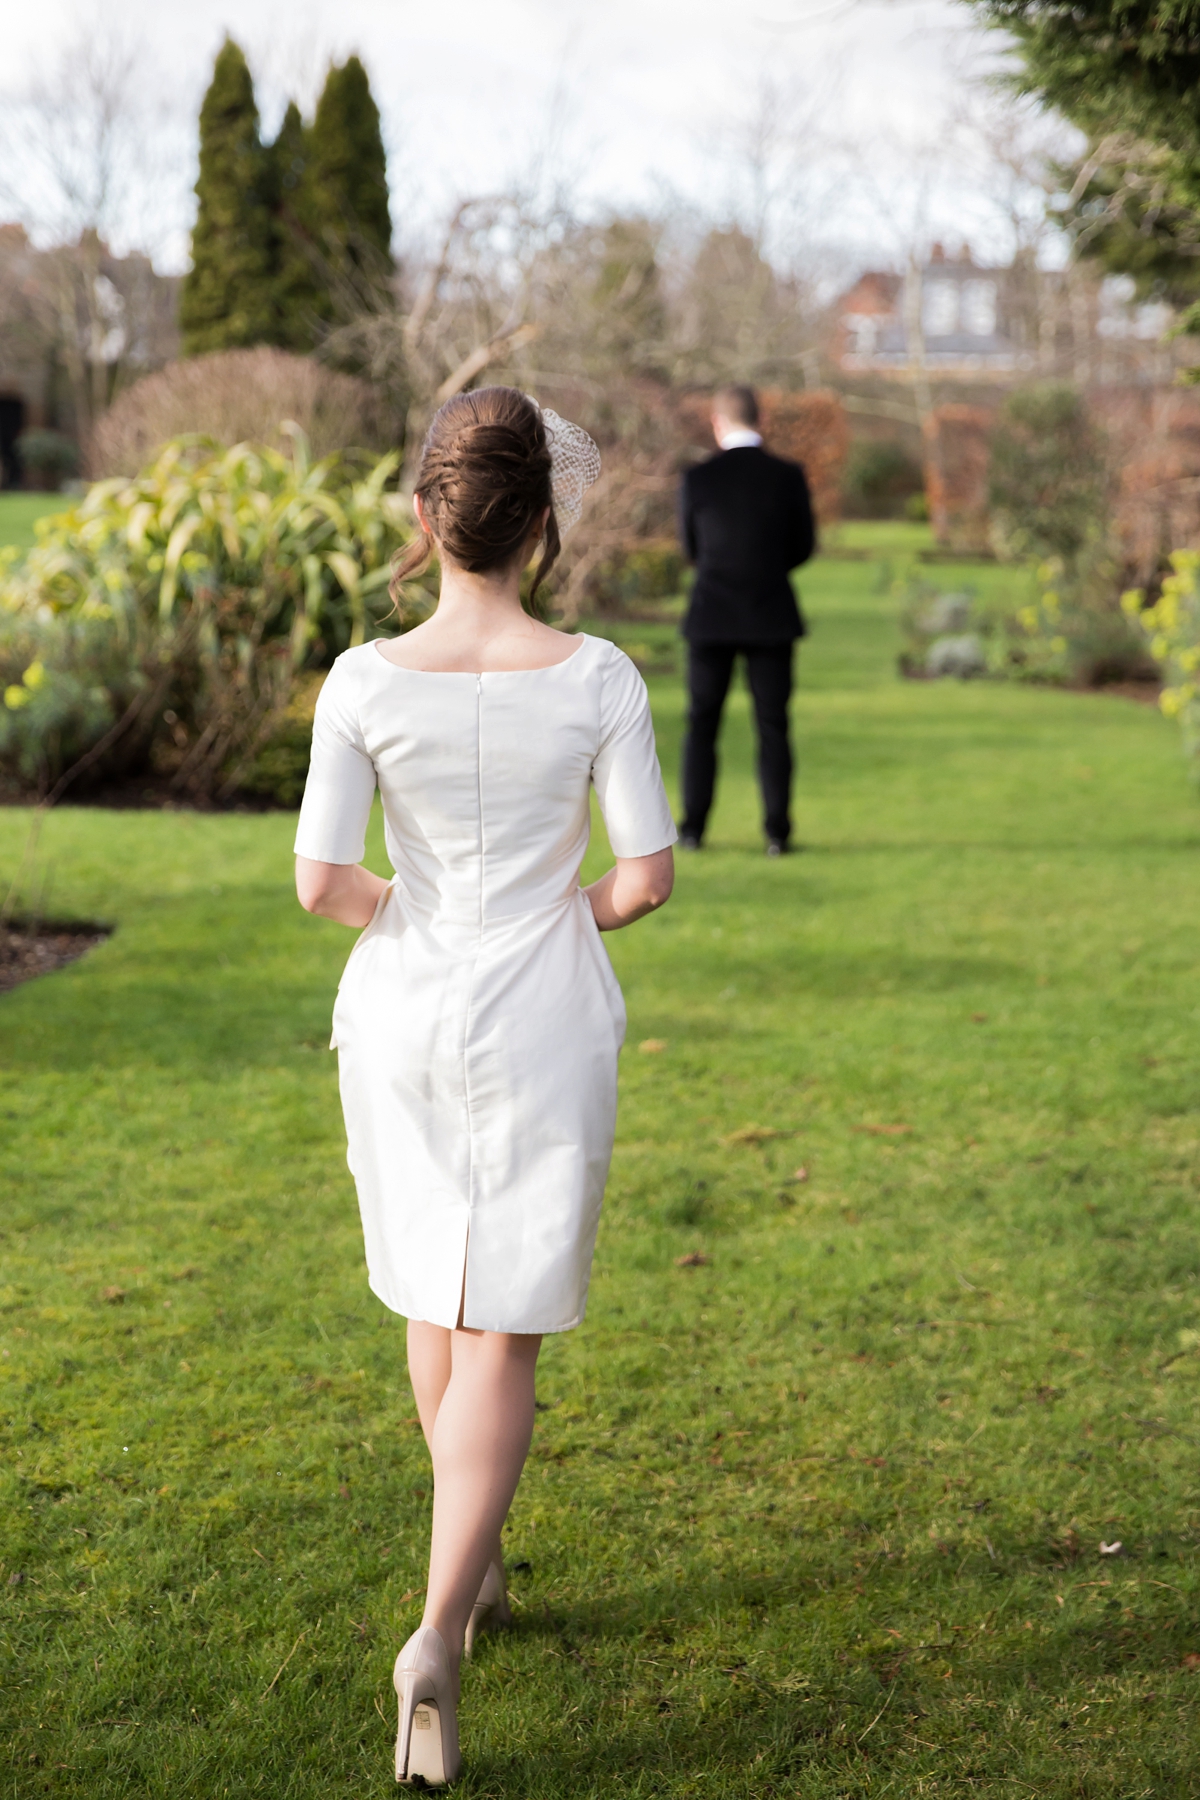 4 A 1950s inspired modern intimate wedding with a short dress by Kate Edmondson